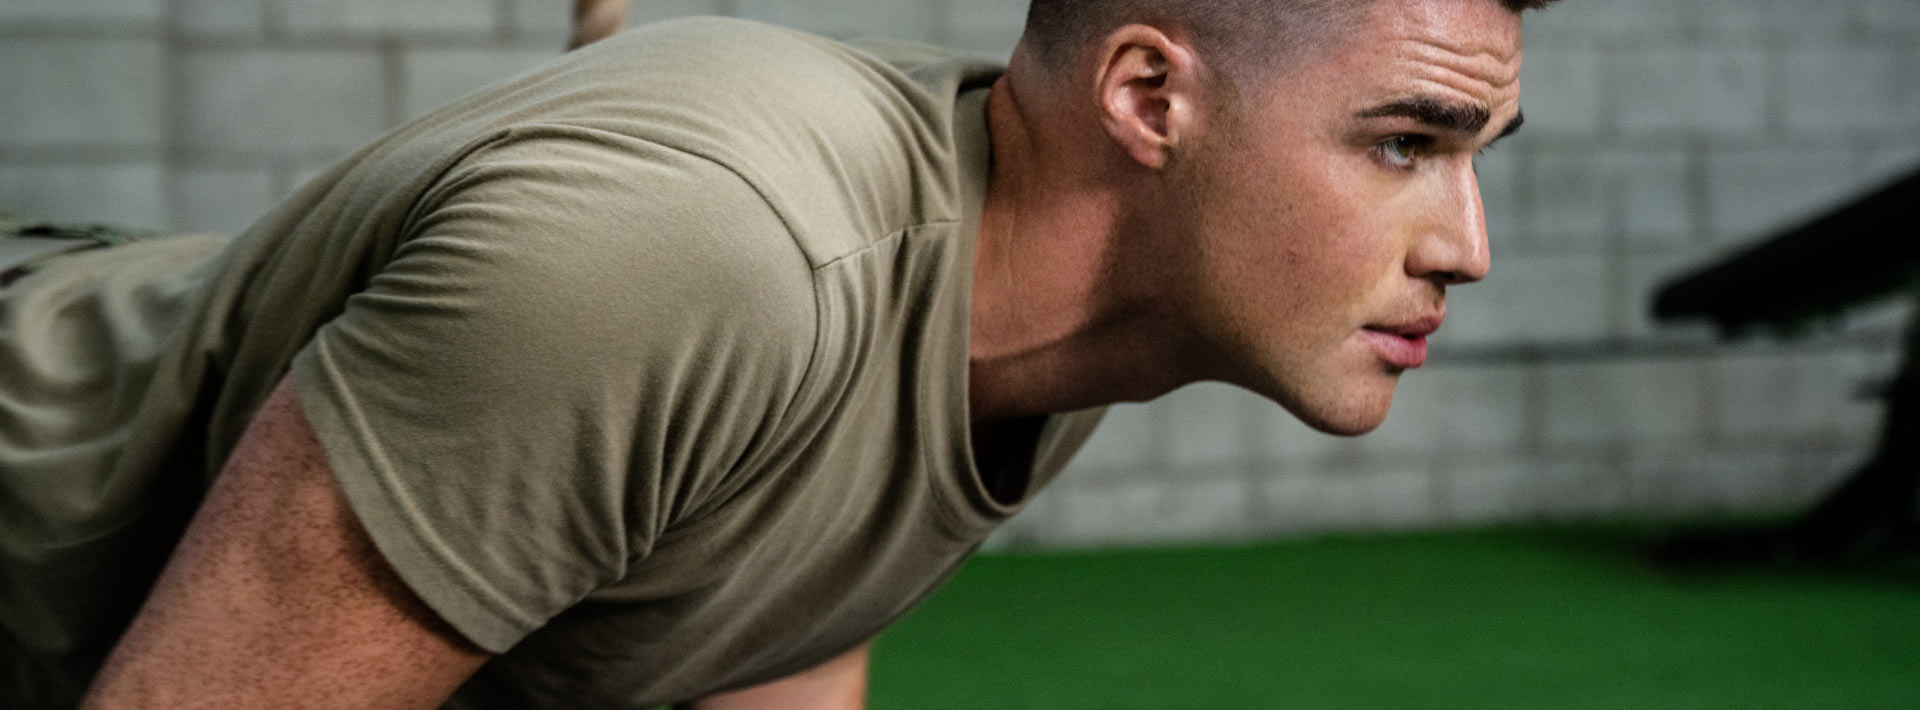 closeup of a man in military uniform doing pushups while he looks ahead